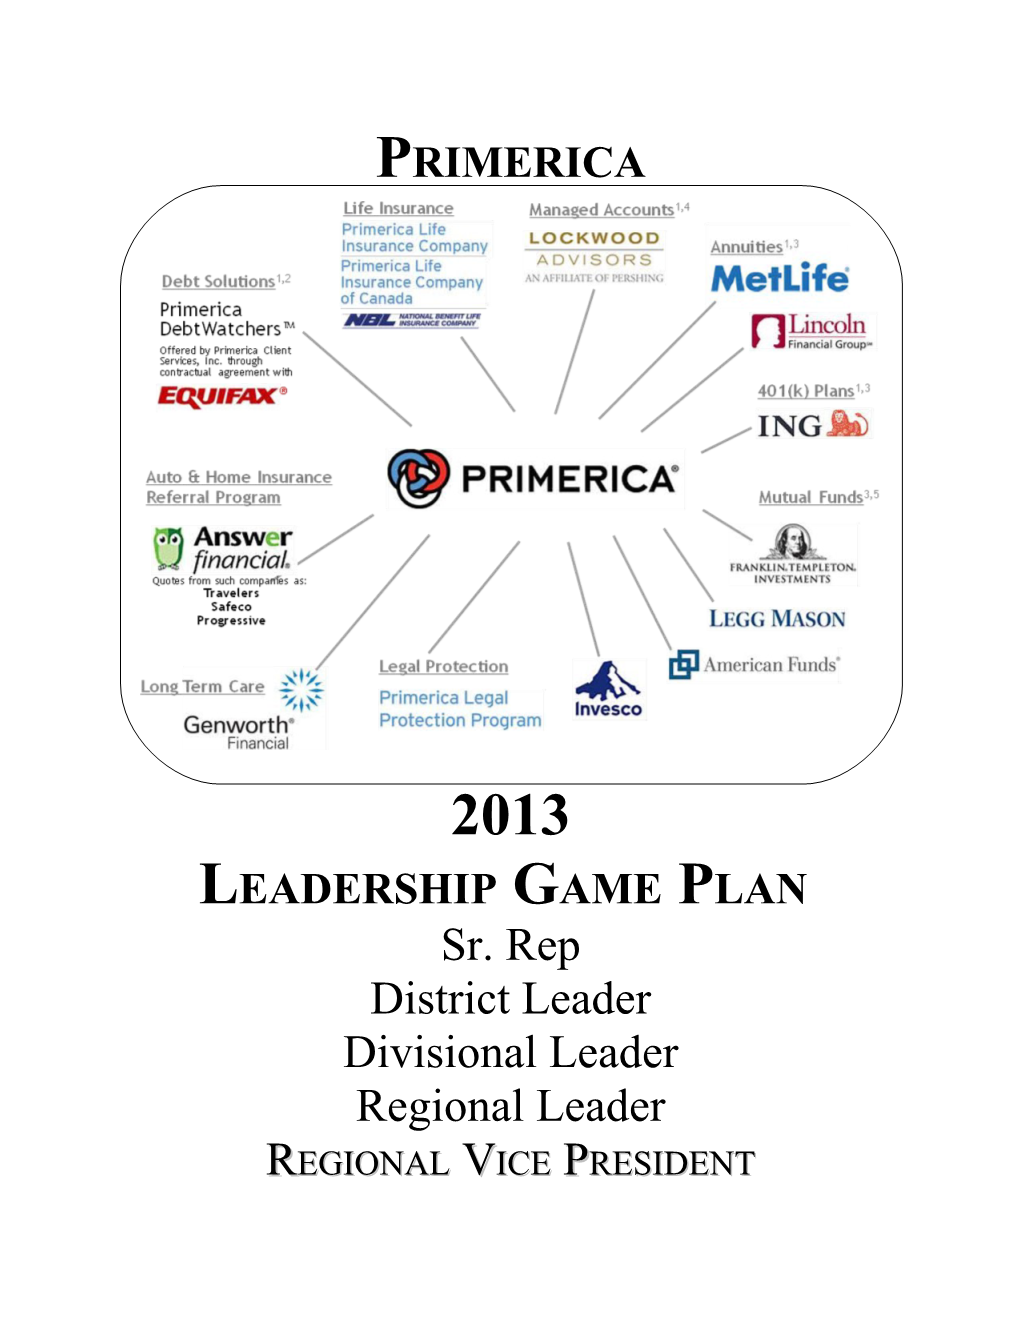 Welcome to Primerica